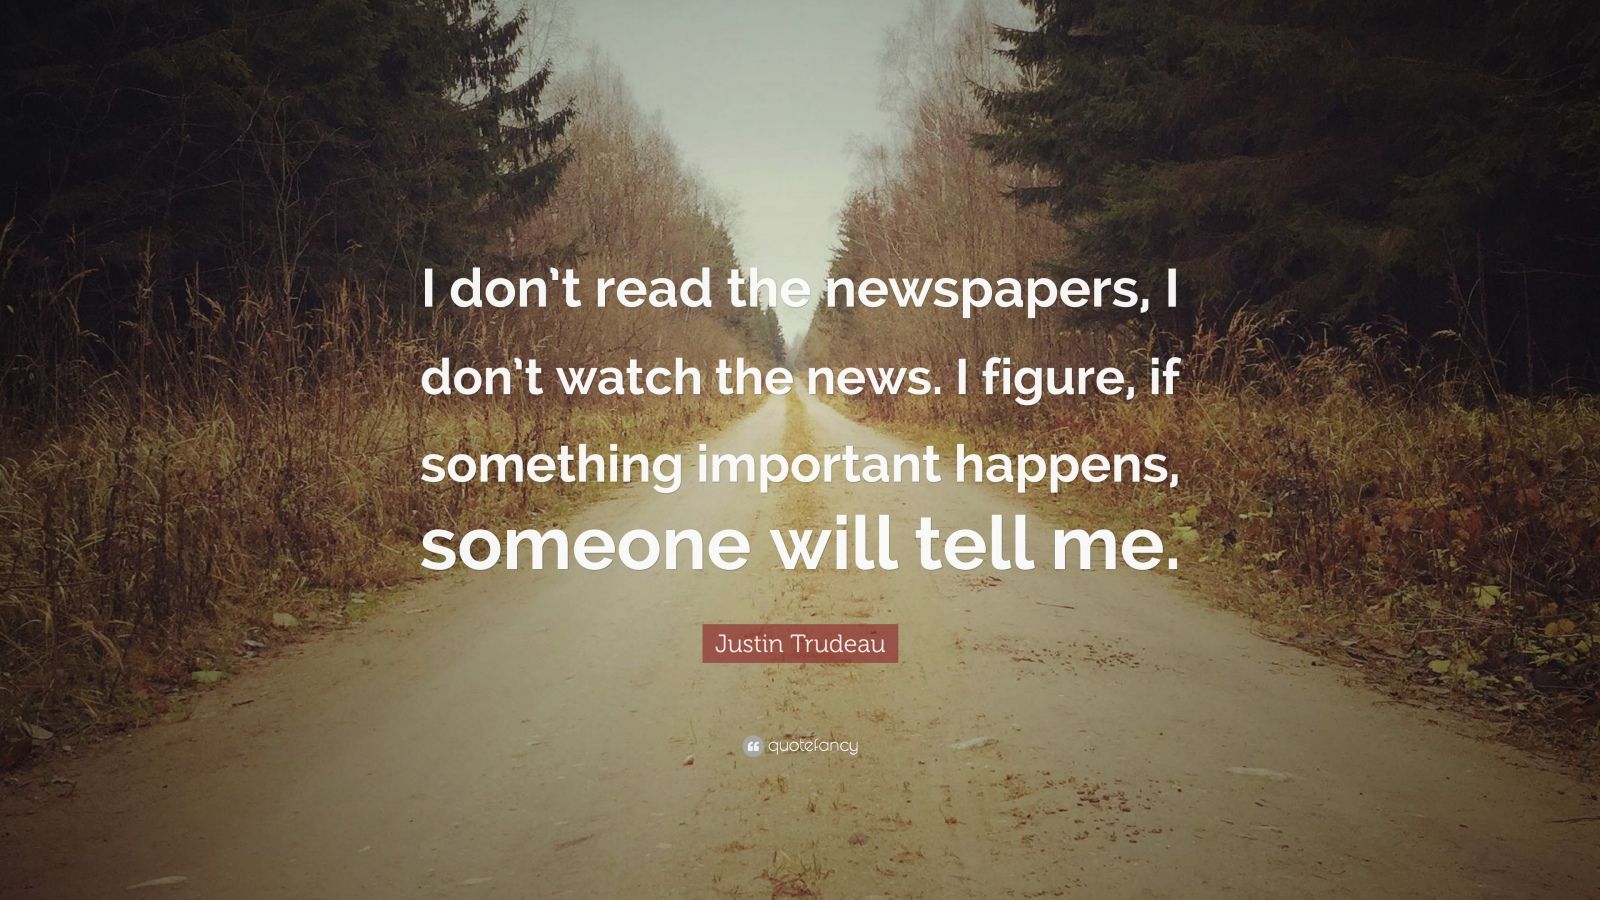 Justin Trudeau Quote: “I don’t read the newspapers, I don’t watch the